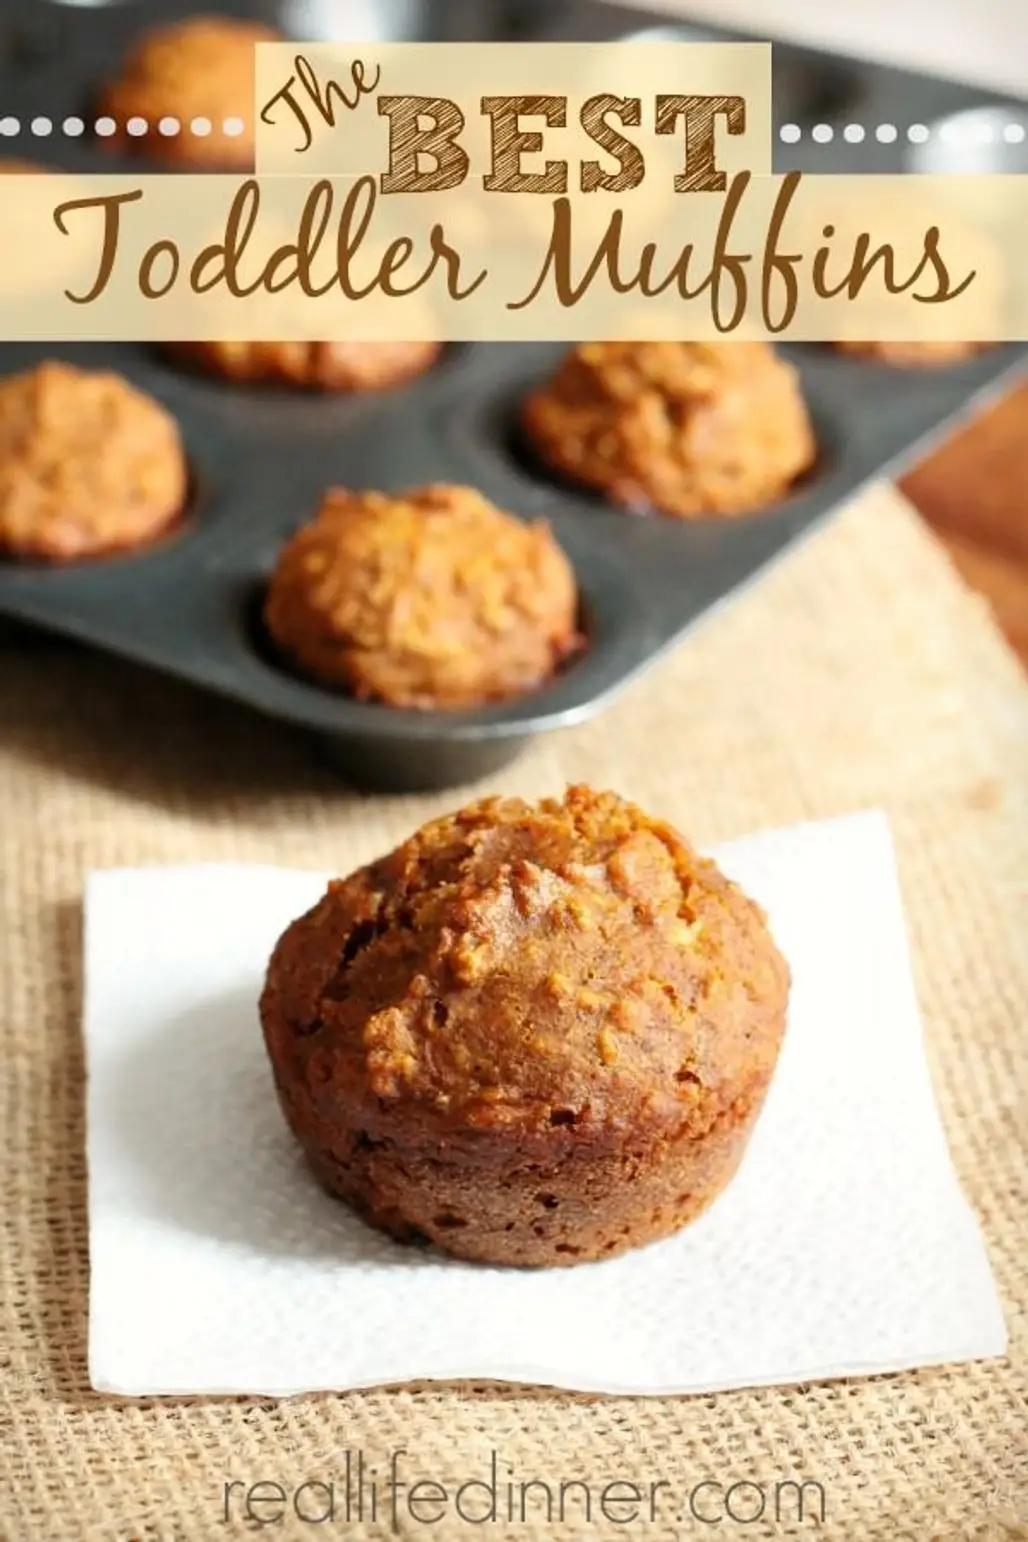 Toddler-Friendly Muffins